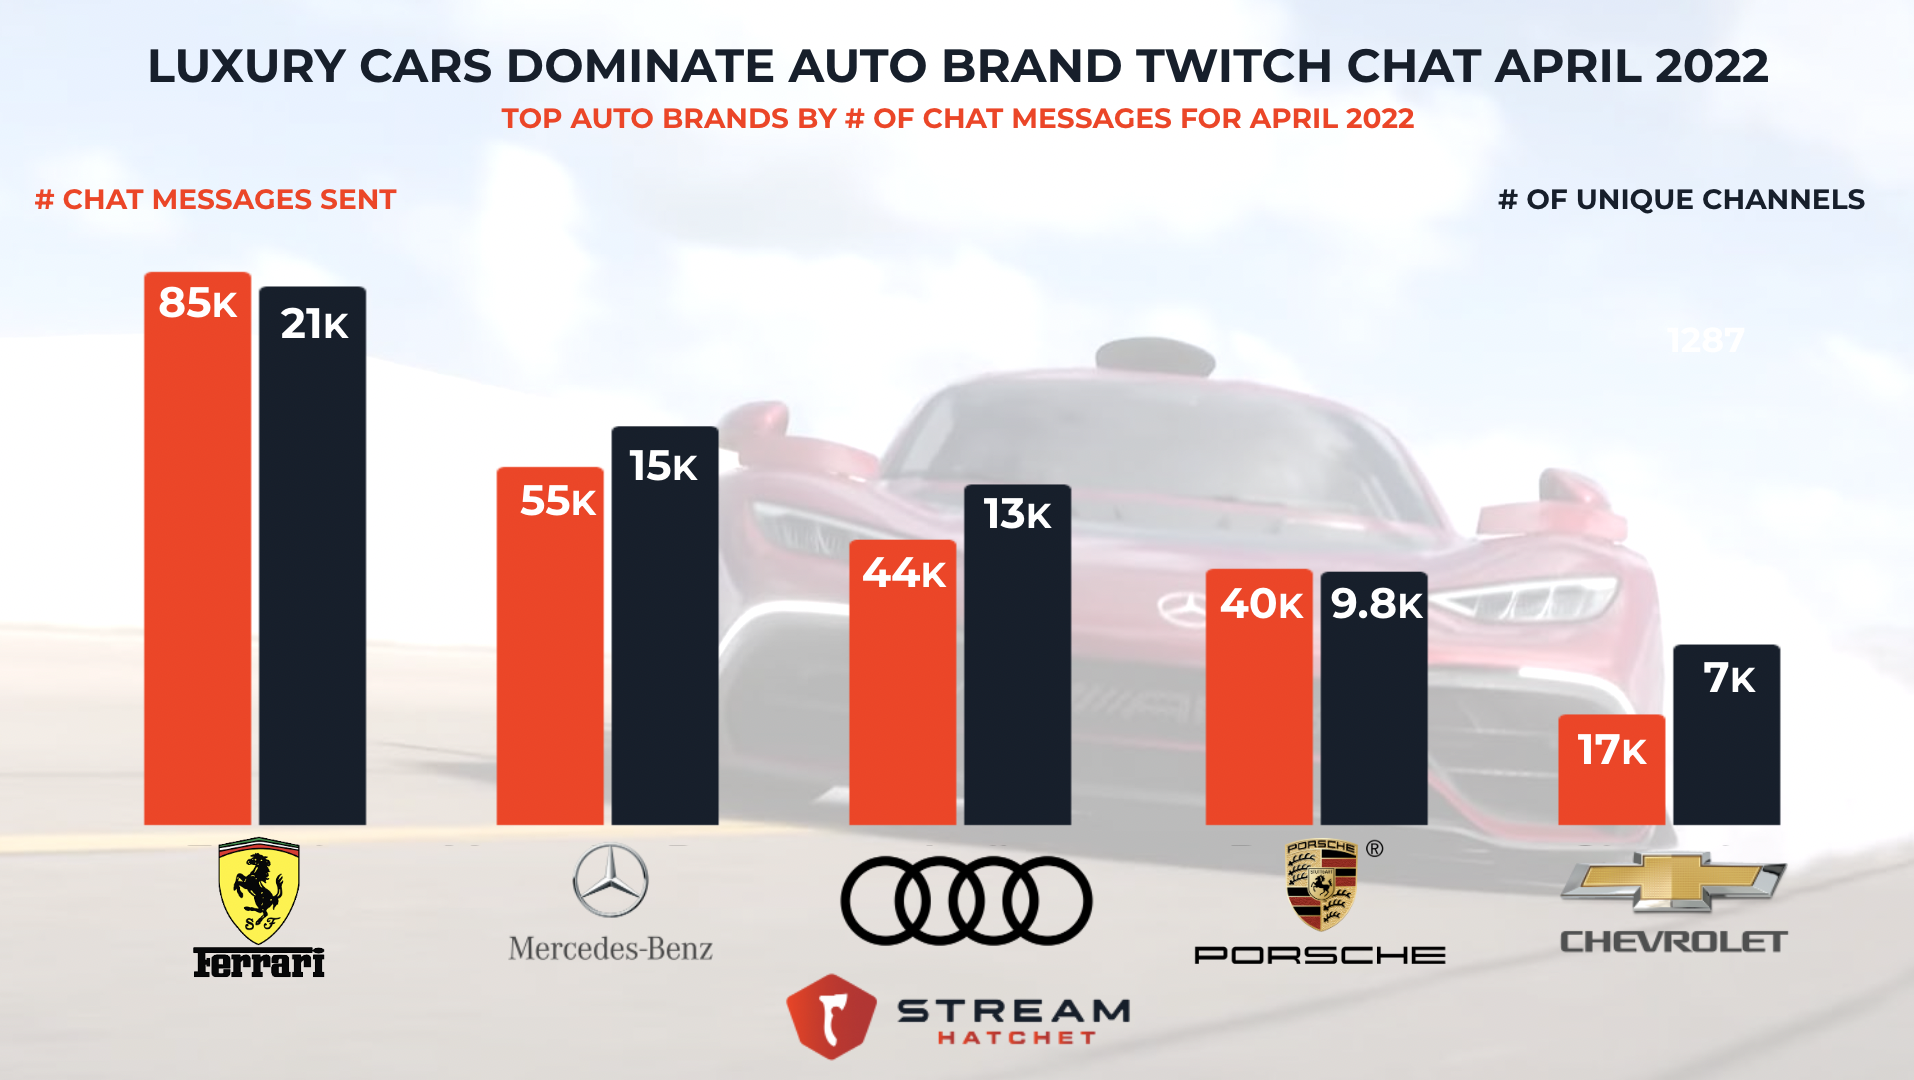 Luxury Cars Dominate Auto Brand Twitch Chat April 2022